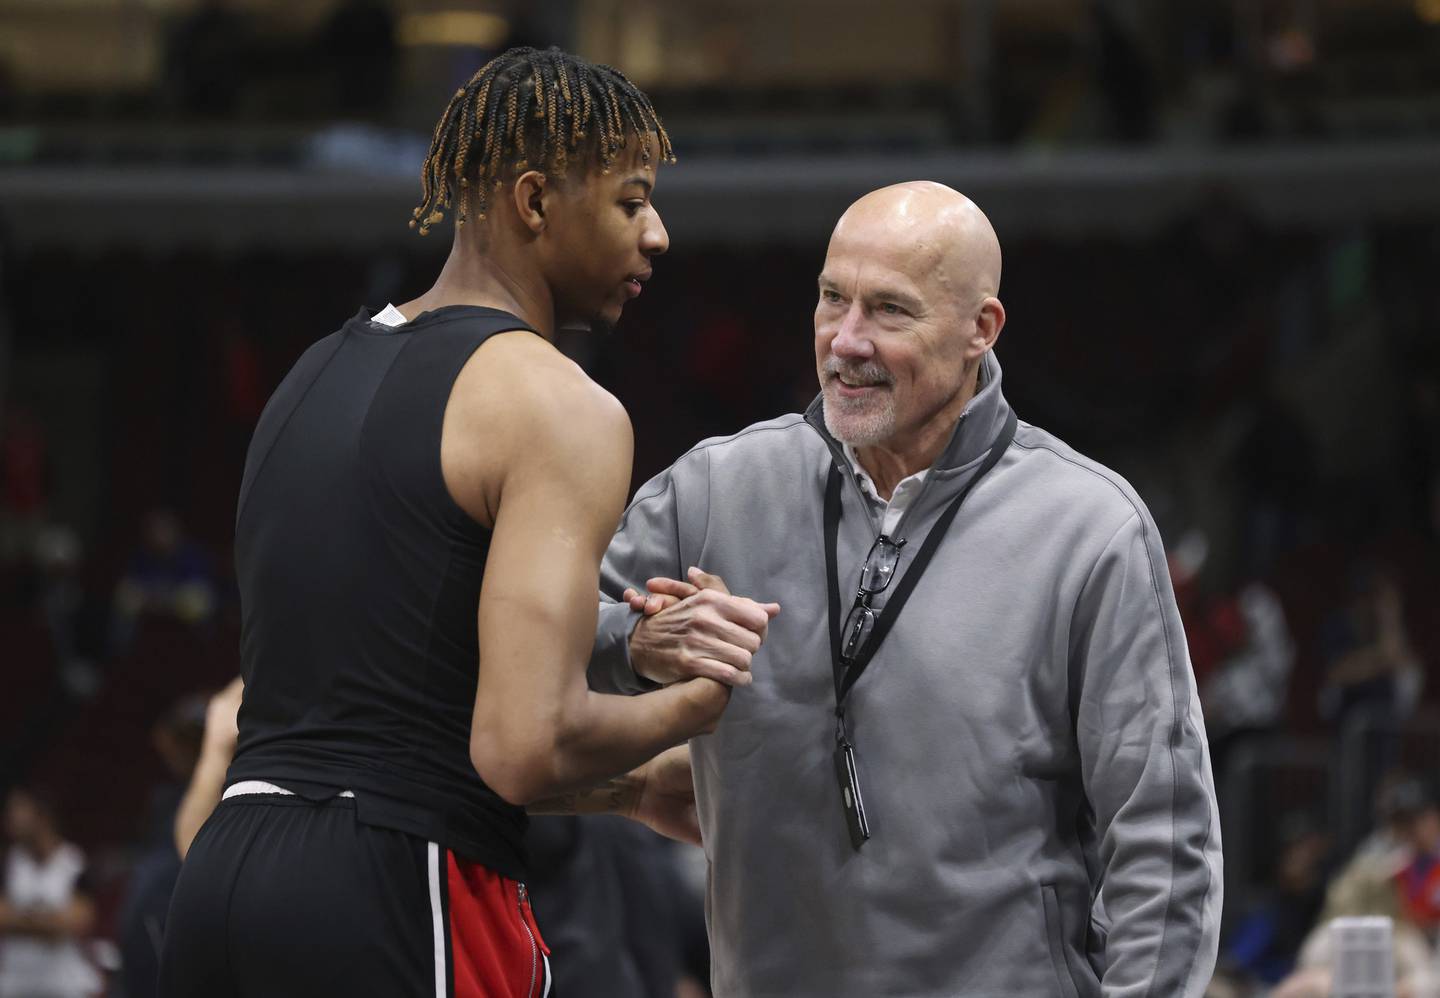 Bulls guard Dalen Terry greets senior adviser of basketball operations John Paxson before a game against the Nuggets on Sunday, Nov. 13, 2022, at the United Center.